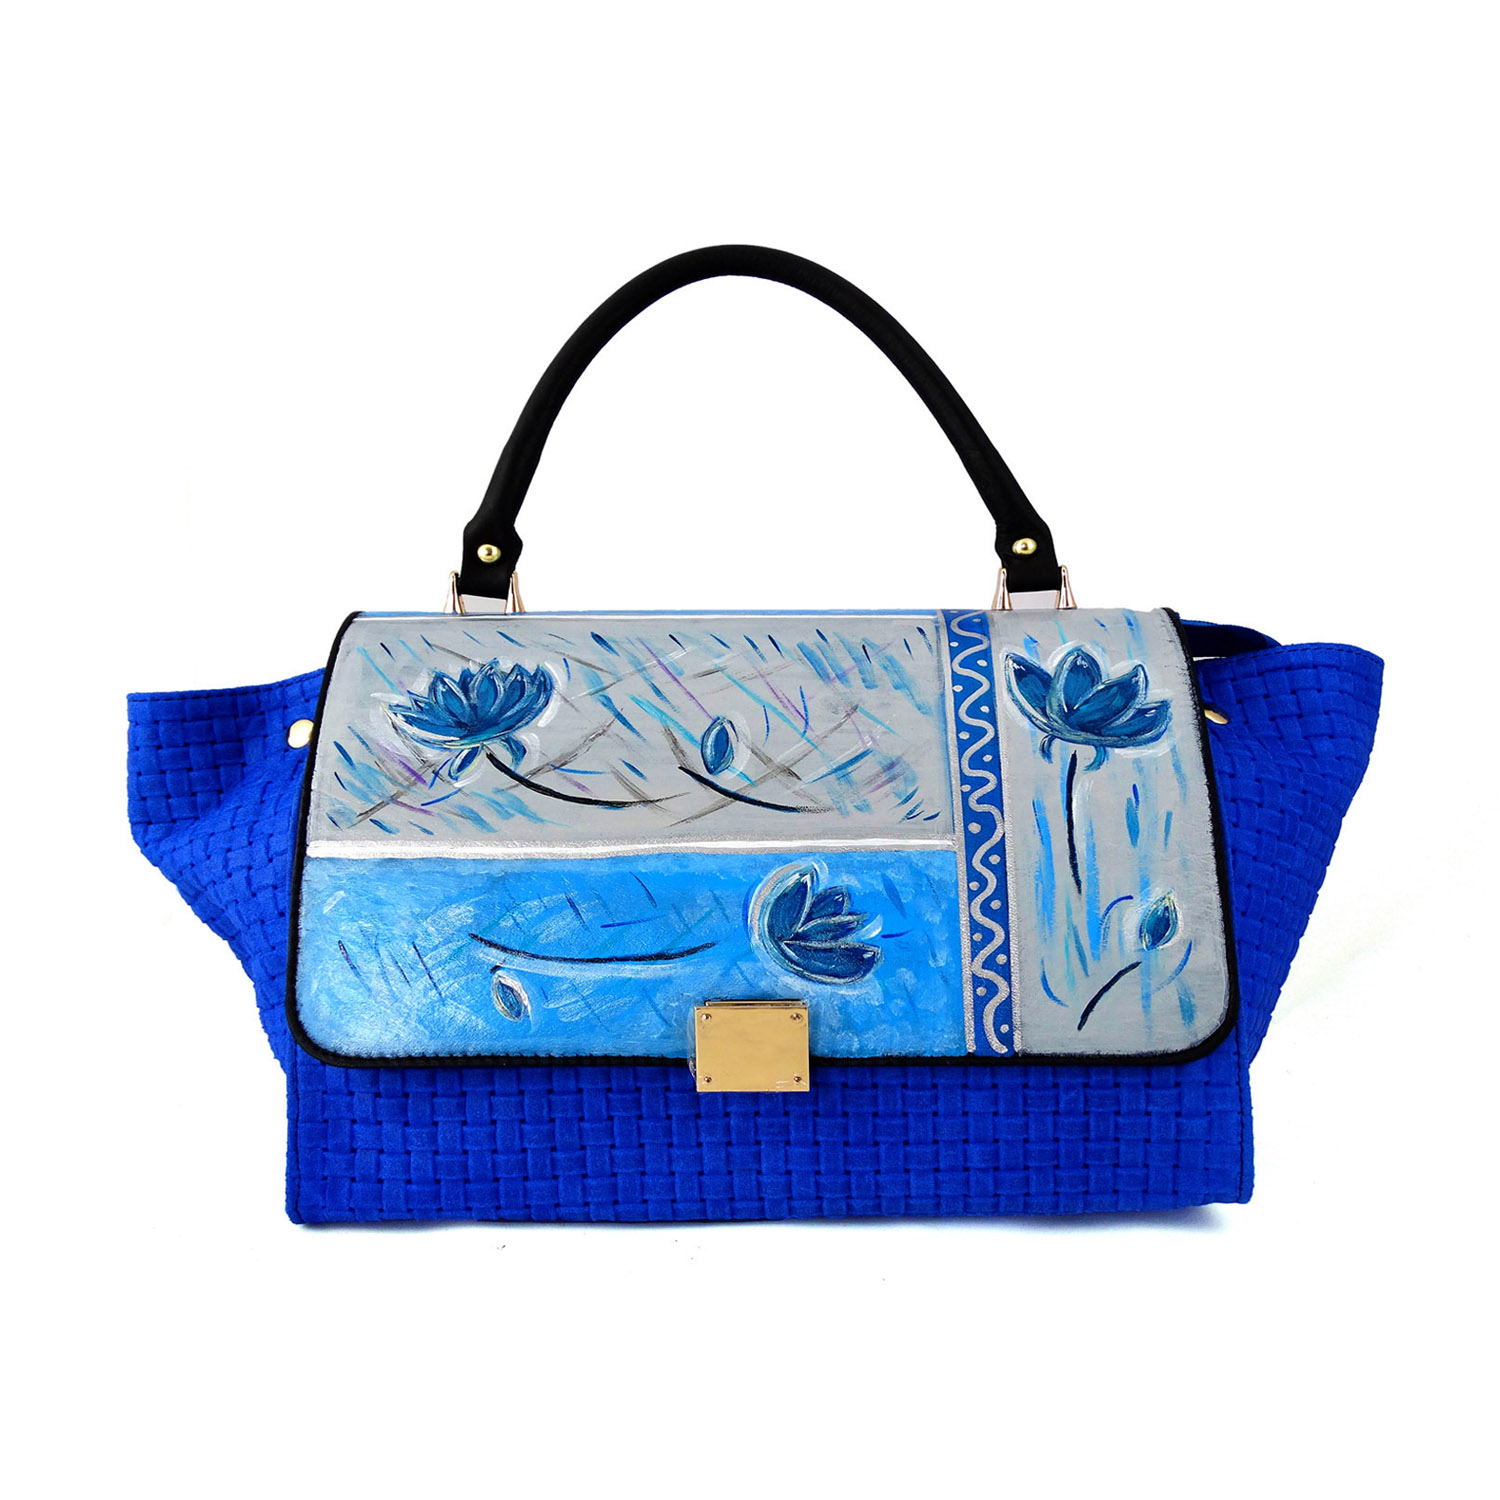 Hand painted bag - Blue Moments